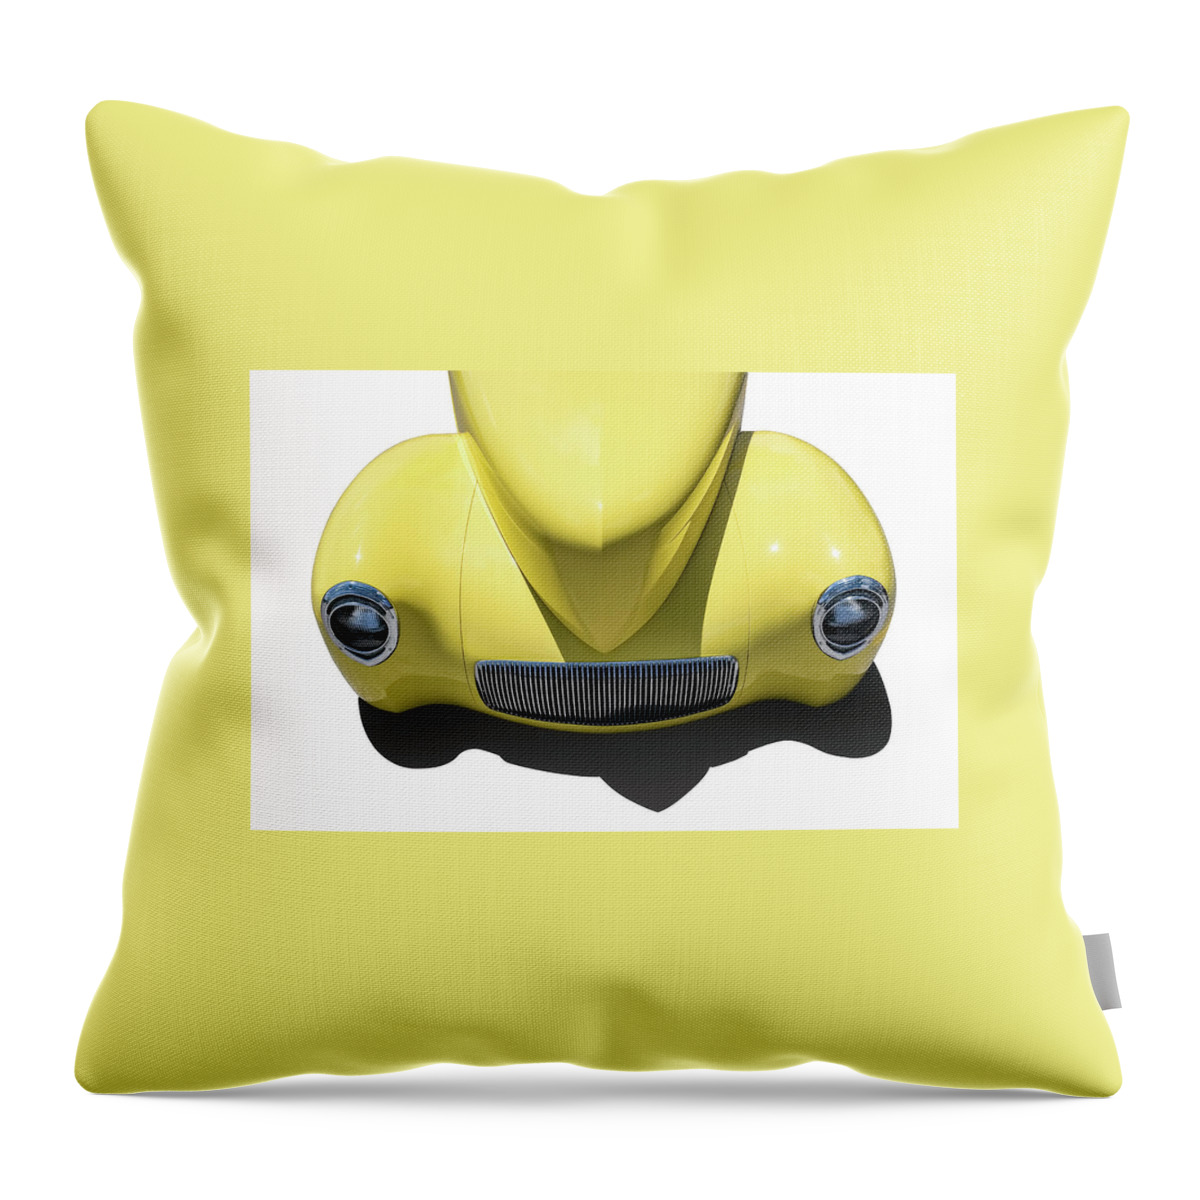 Vintage Throw Pillow featuring the digital art 41 Willys Nose by Douglas Pittman